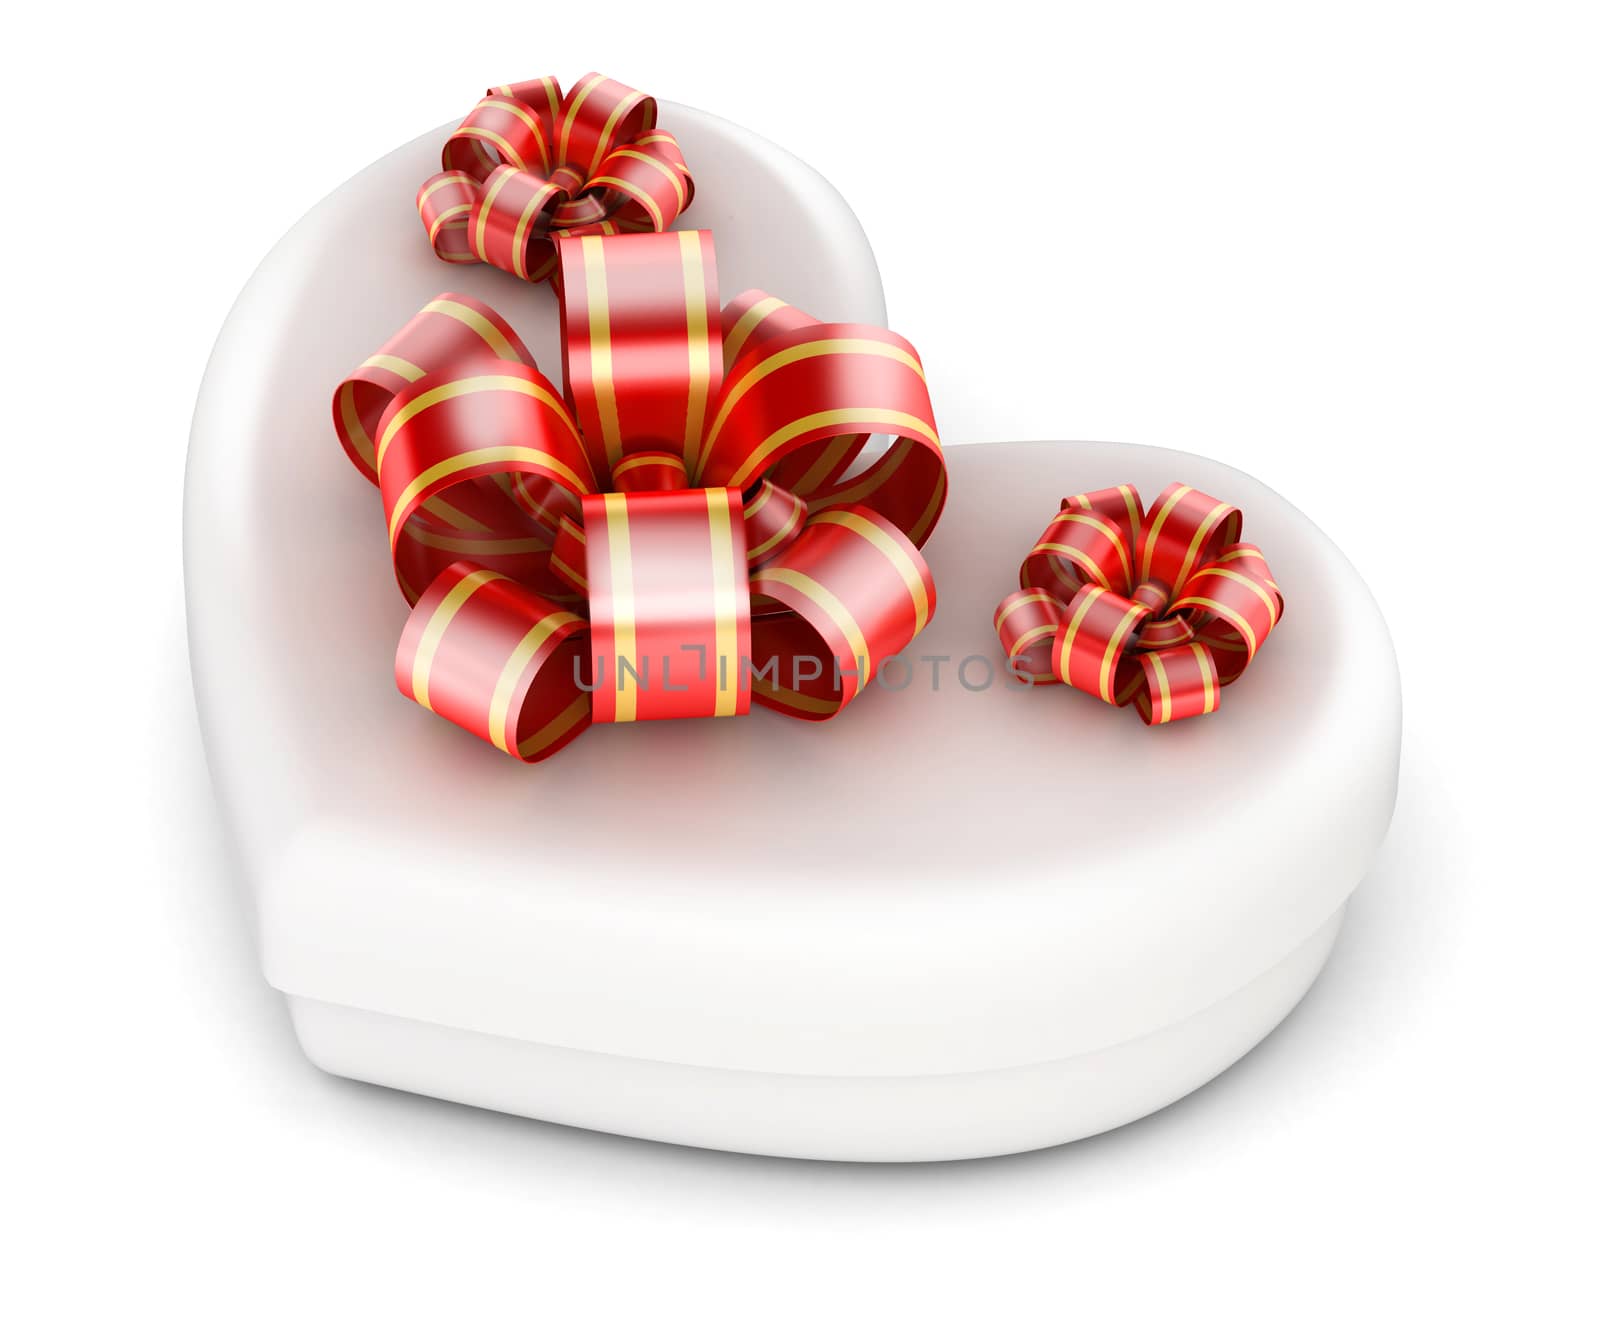 Love in gift box by iunewind